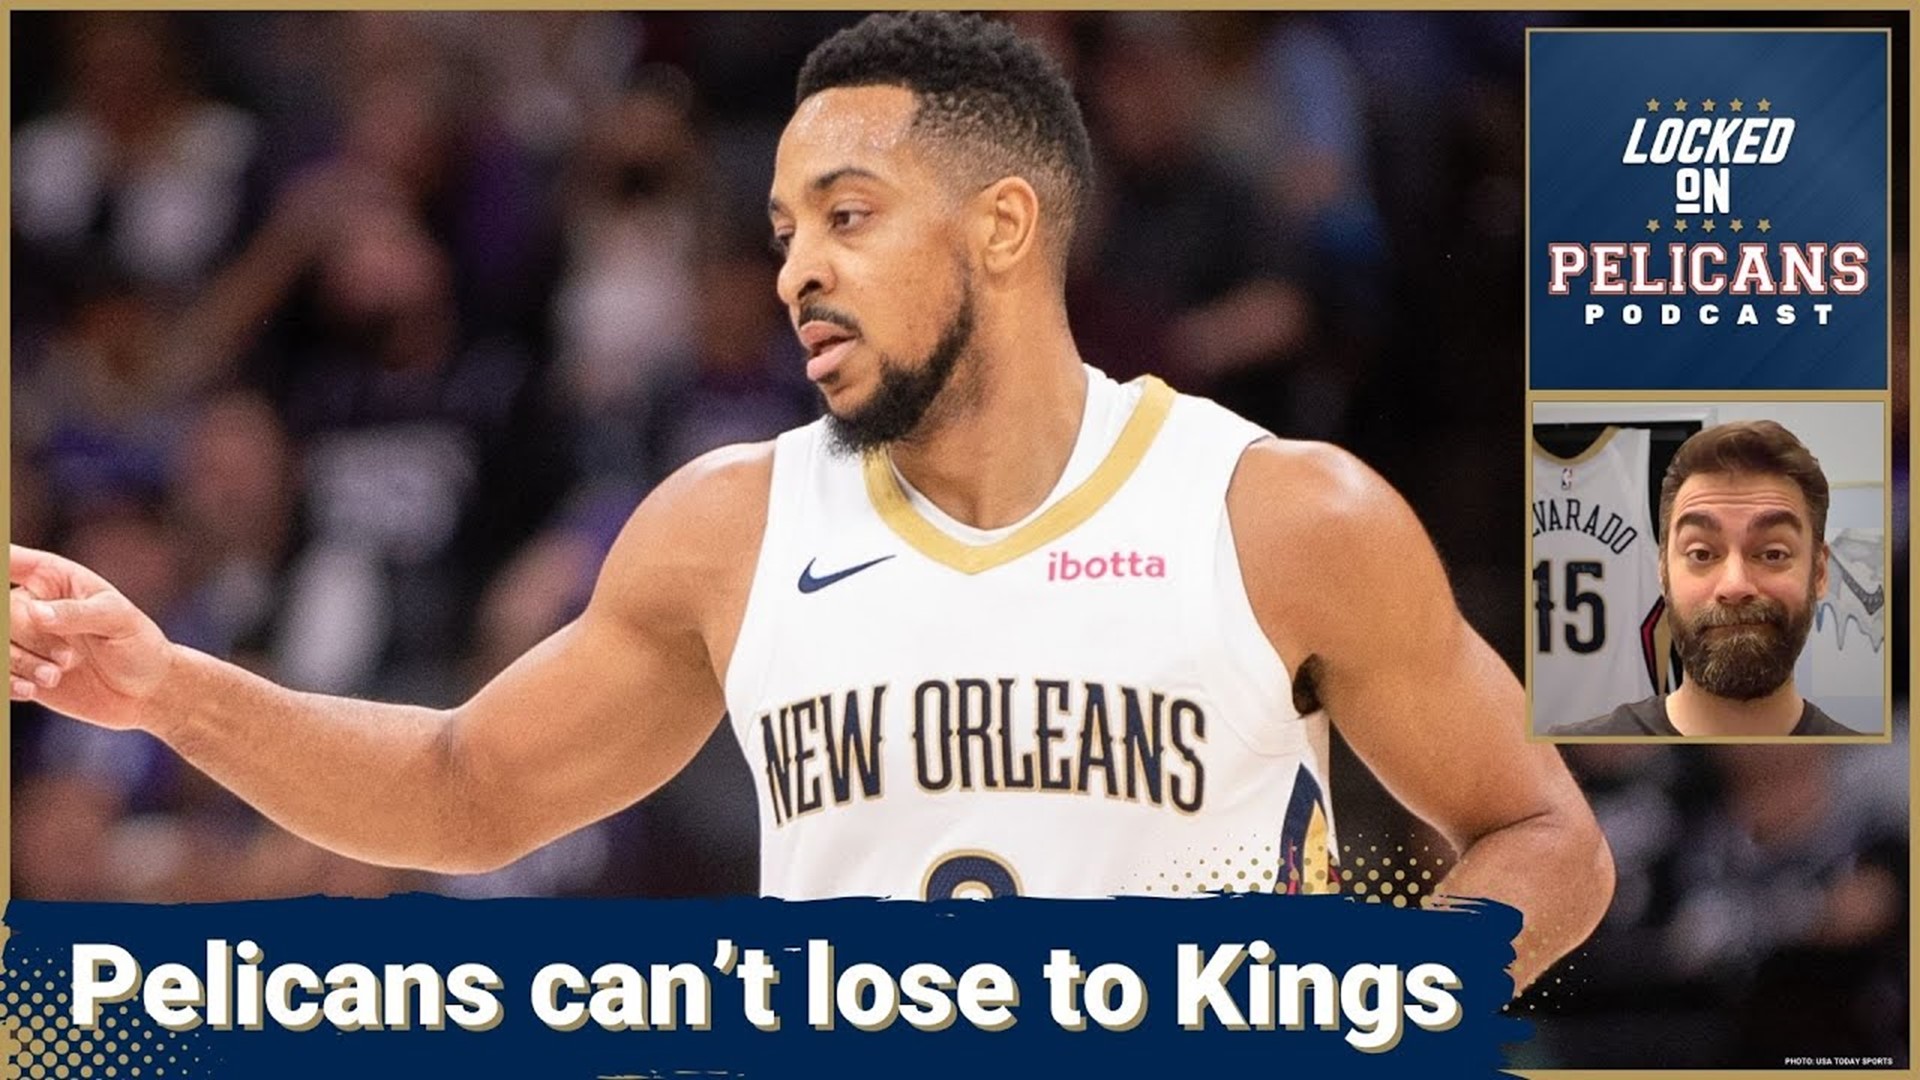 Just one game after a disappointing loss to the Los Angeles Clippers, Brandon Ingram and the New Orleans Pelicans blew out the De'Aaron Fox and the Sacramento Kings